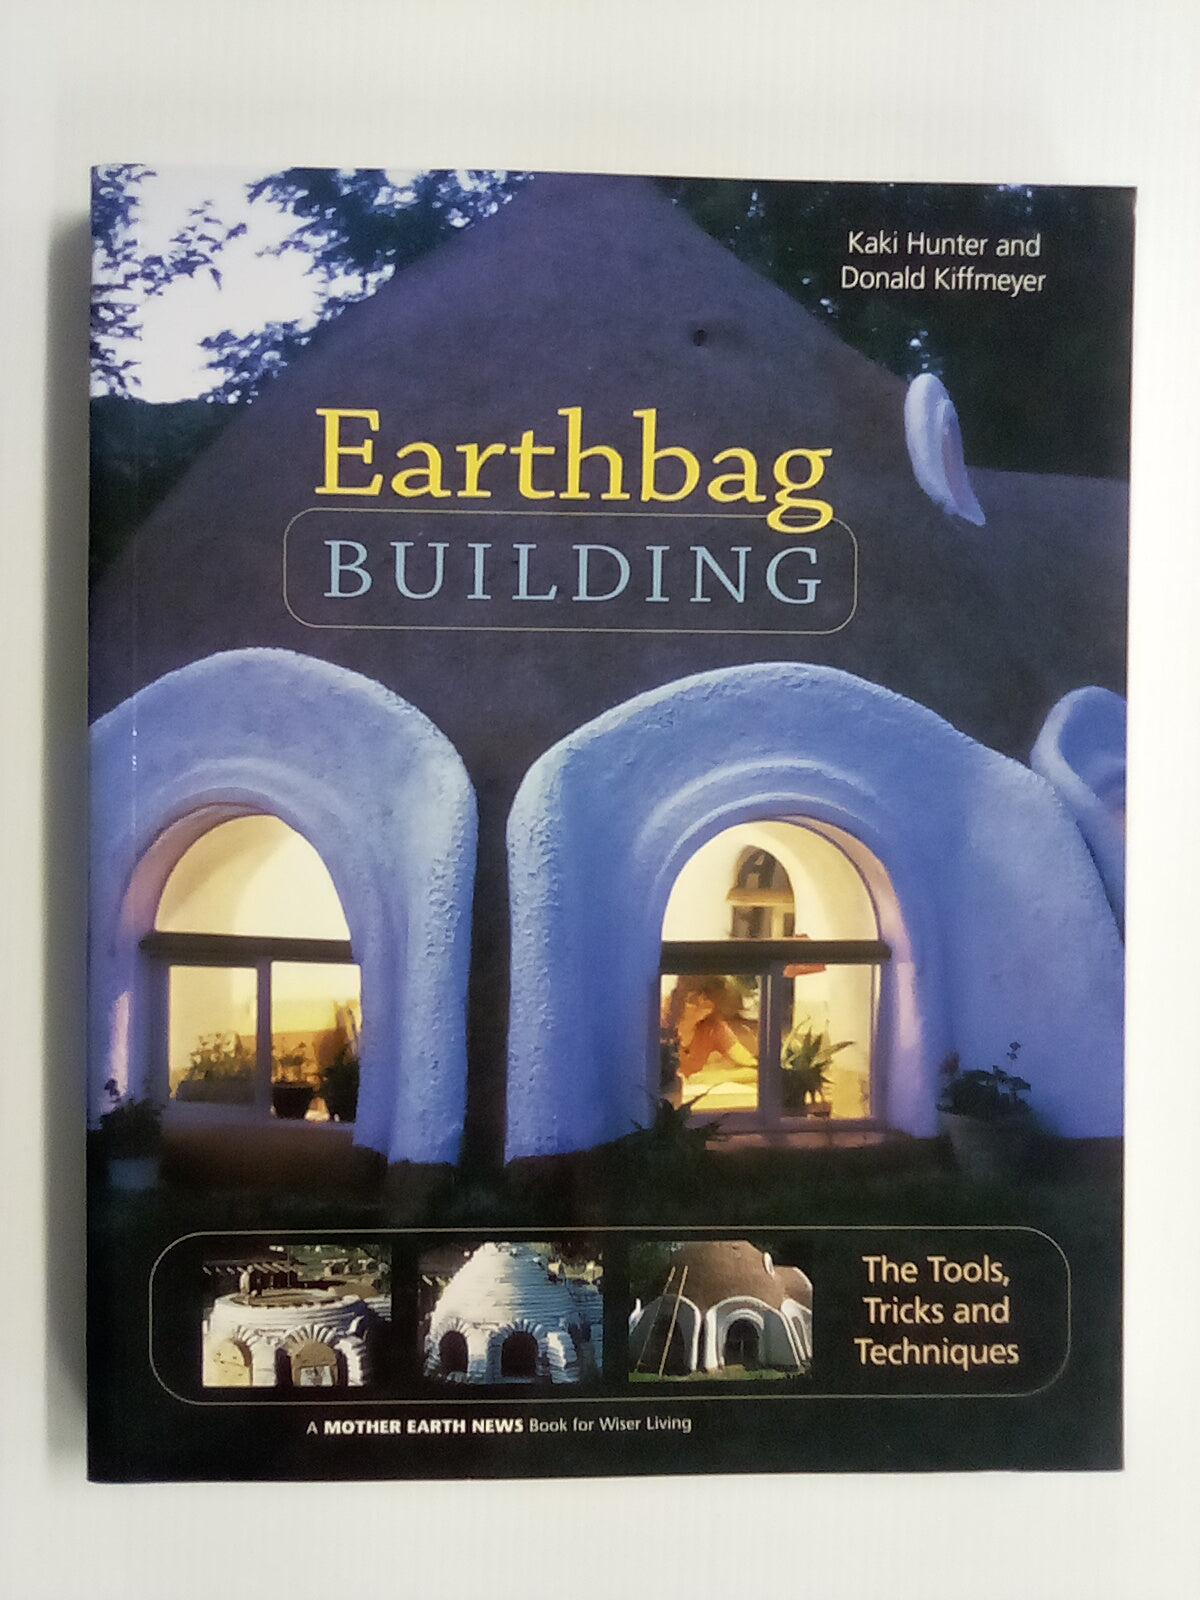 Earthbag Building - The Tools, Tricks, and Techniques by Kaki Hunter & Donald Kiffmeyer